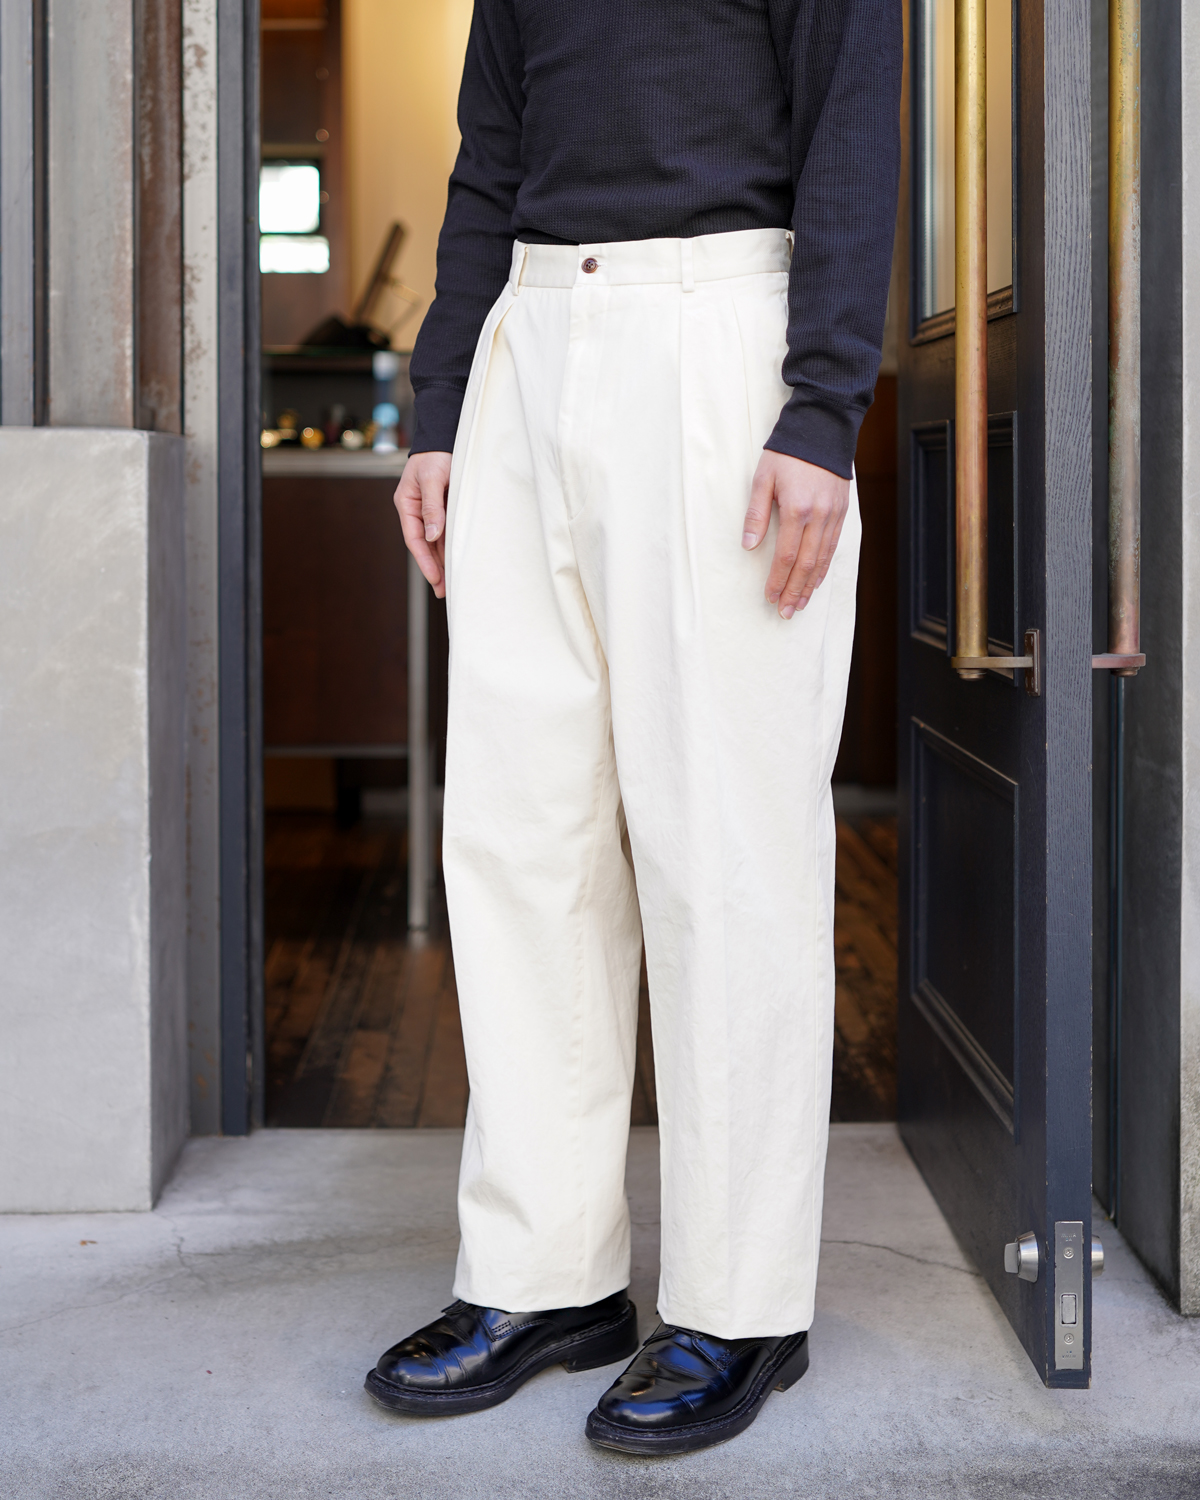 NEAT｜NEAT Chino - Ivory｜PRODUCT｜Continuer Inc.｜メガネ・サングラス｜Select Shop